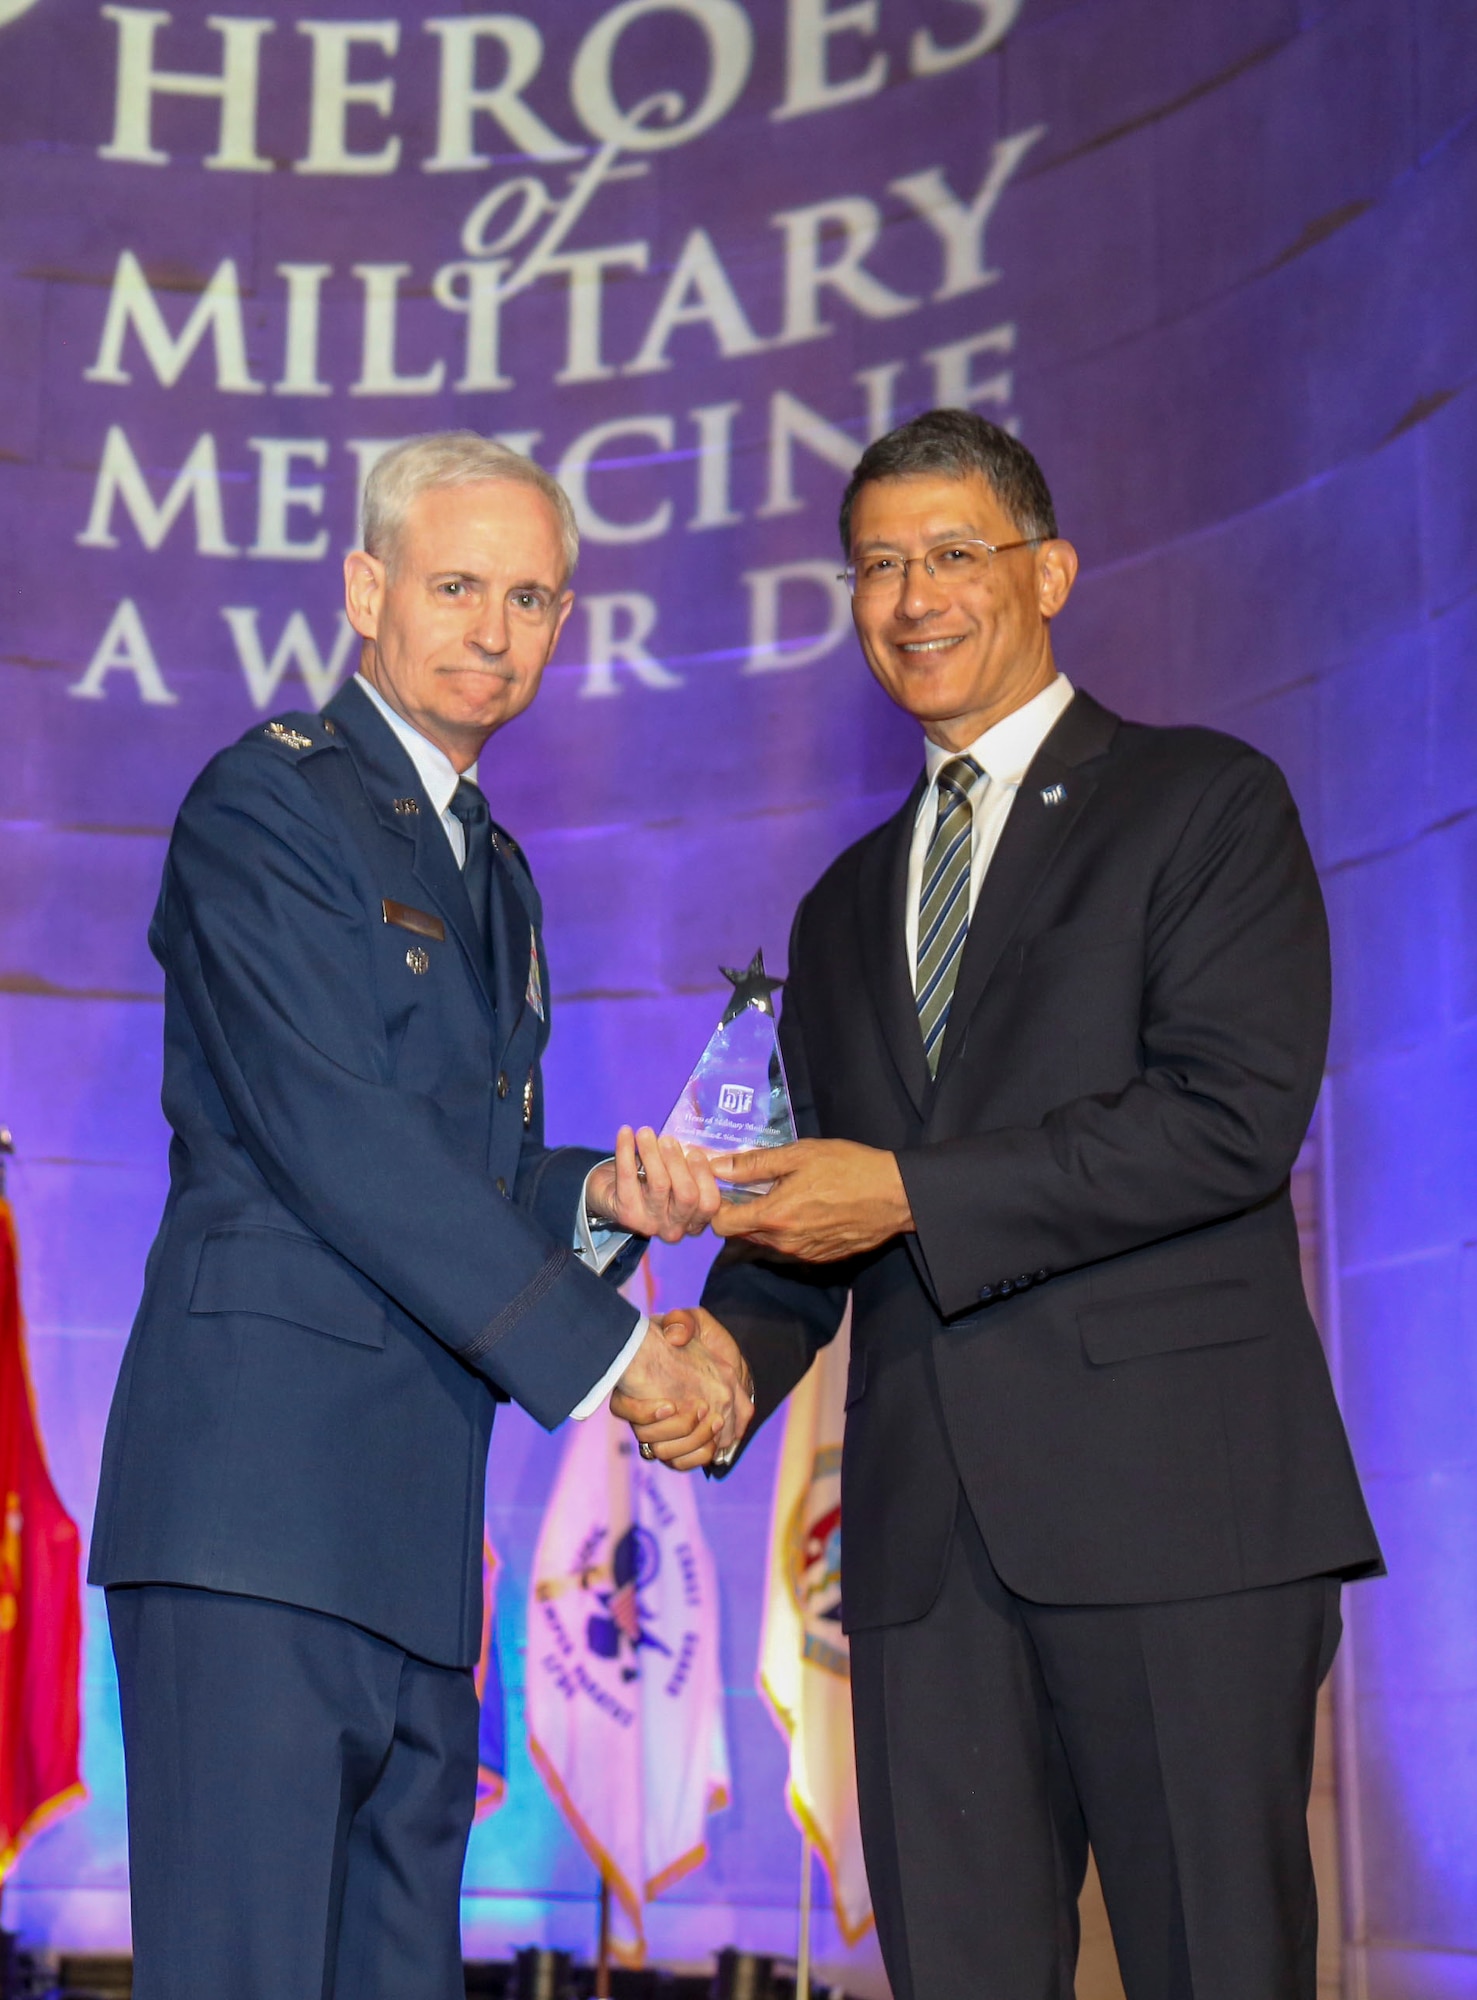 U.S. Air Force Maj. Gen. (retired) Joseph Caravalho (right), president, Henry M. Jackson Foundation for the Advancement of Military Medicine, congratulates U.S. Air Force Col. William E. Nelson, chief, integrated and international operational medicine, 711th Human Performance Wing, after receiving the 2018 Heroes of Military Medicine Award in Washington, D.C., May 3, 2018. Col. Nelson was recognized for his exemplary career as an Air Force flight surgeon, and for his contributions to the Air Force Integrated Operational Support mission. (Courtesy photo illustration by Henry M. Jackson Foundation for the Advancement of Military Medicine)